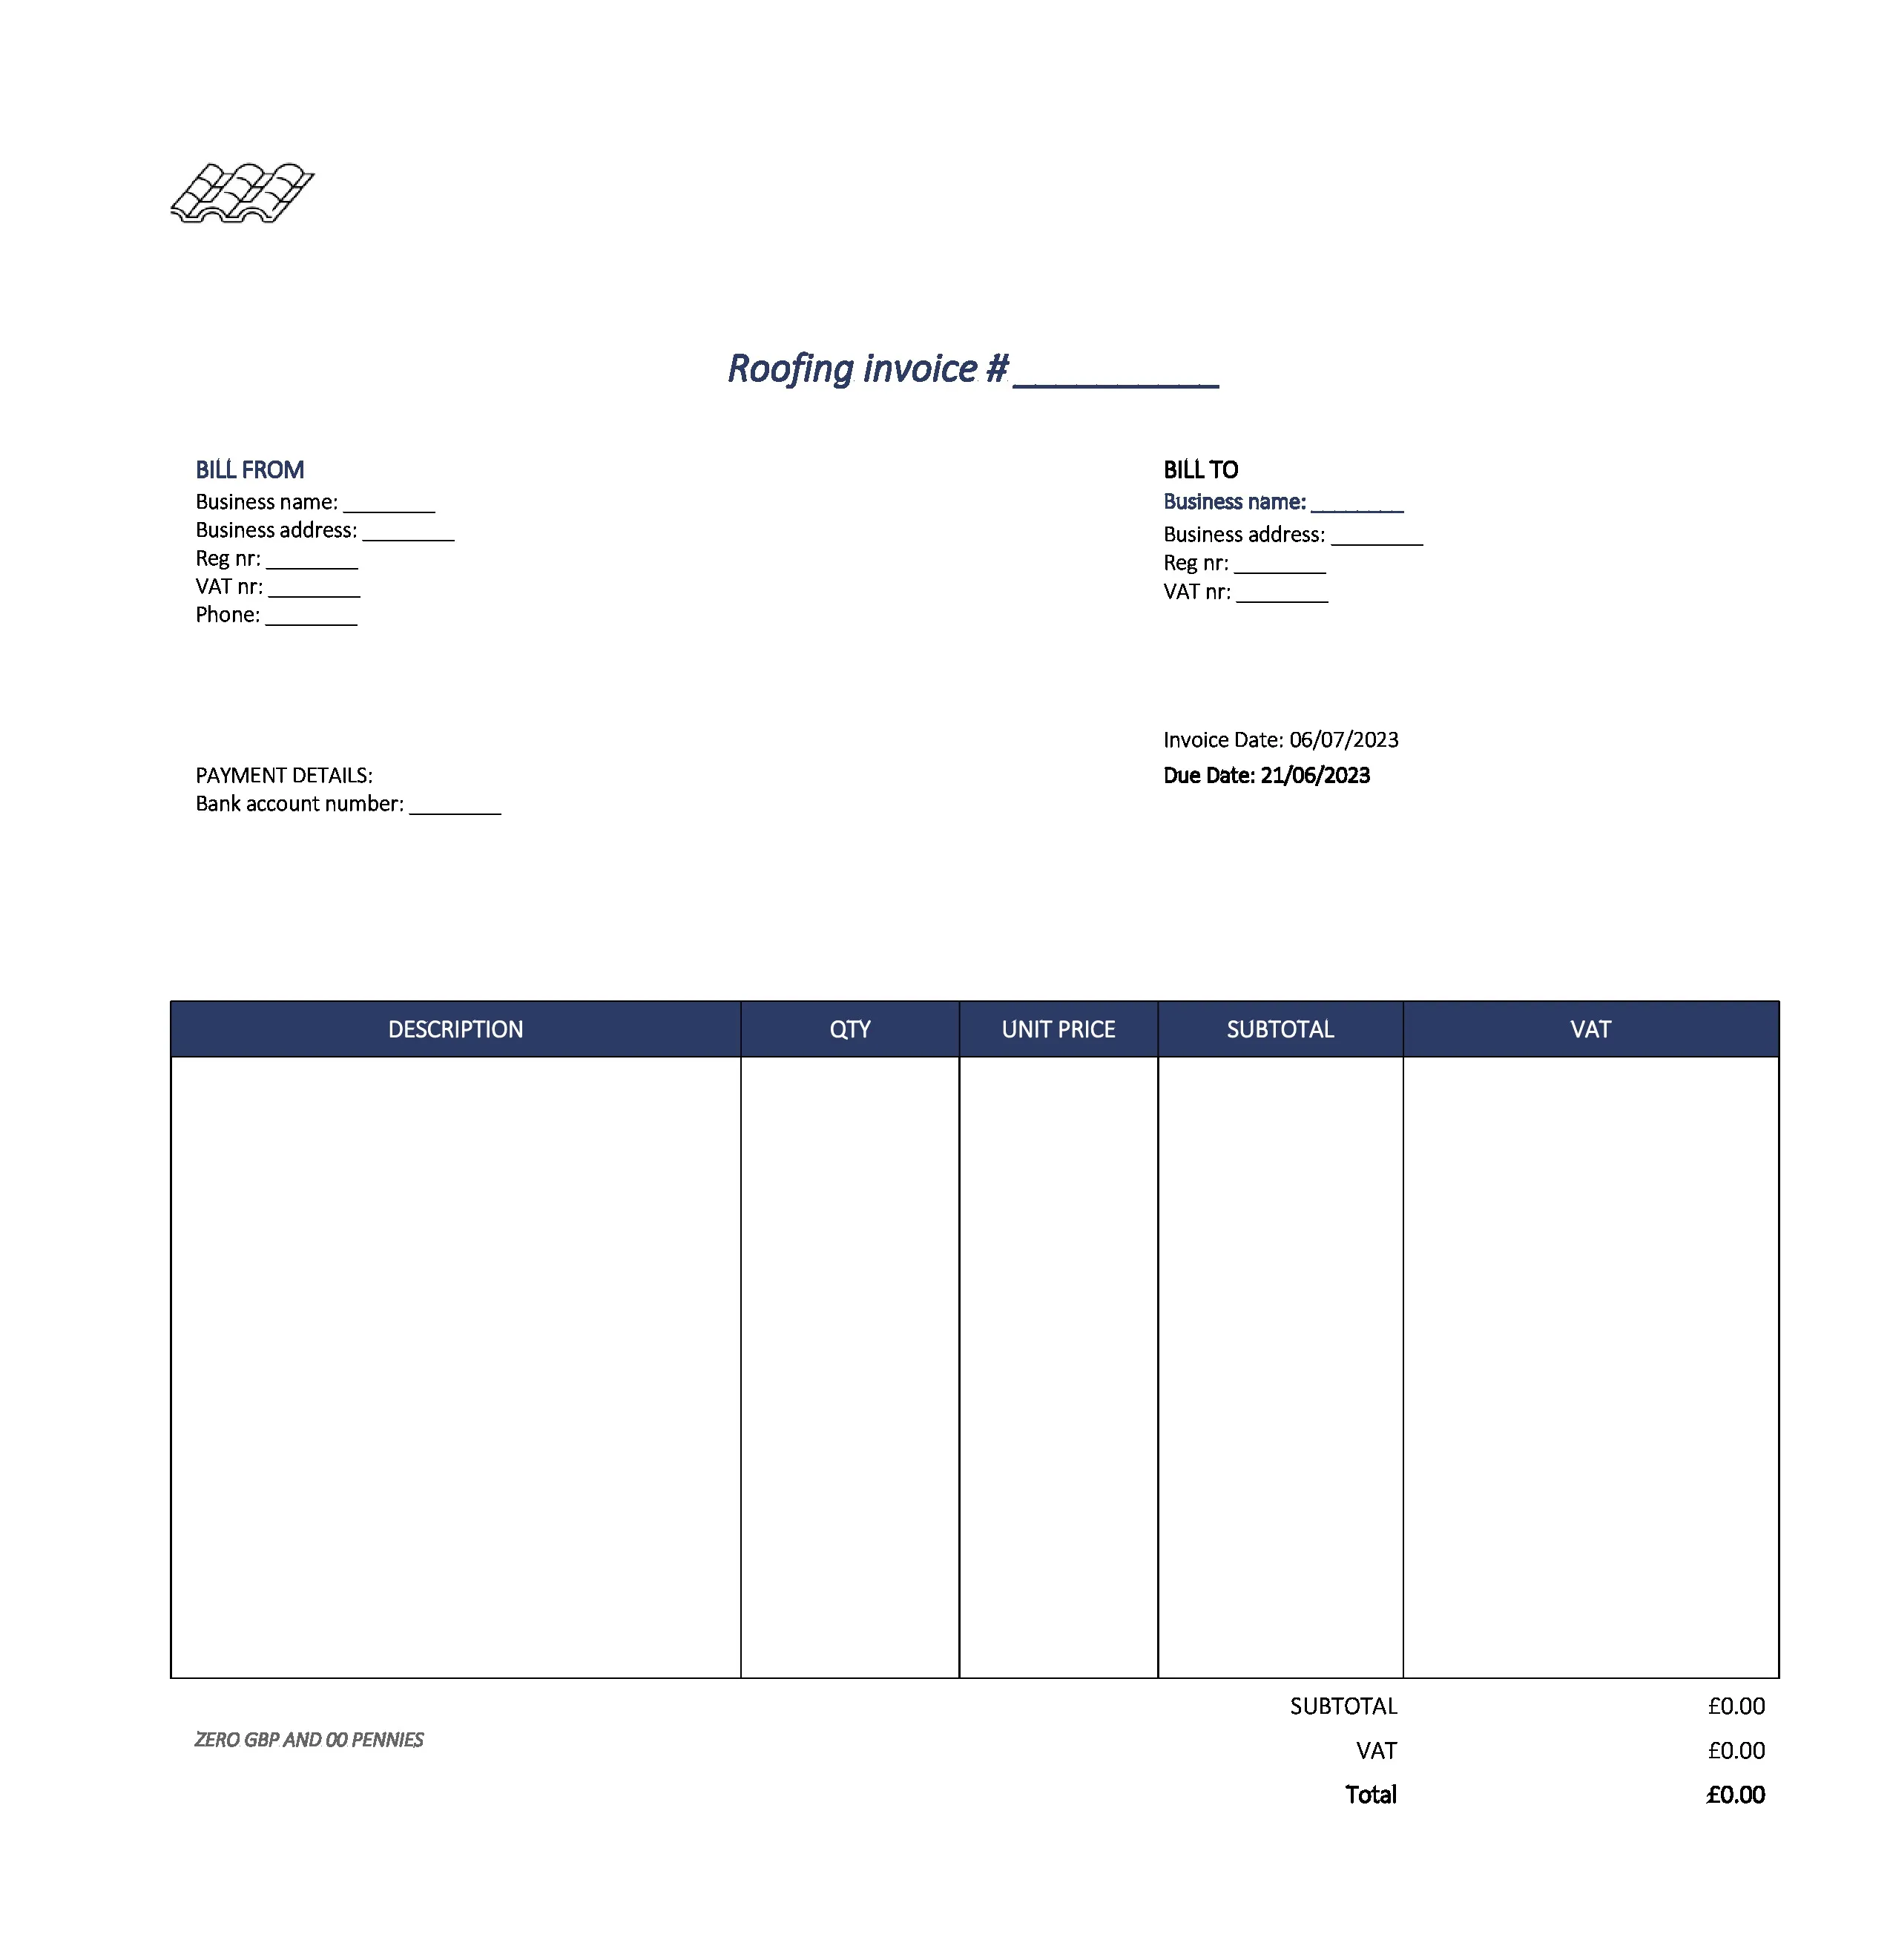 Detailed Roofing Invoice Template UK Excel / Google sheets